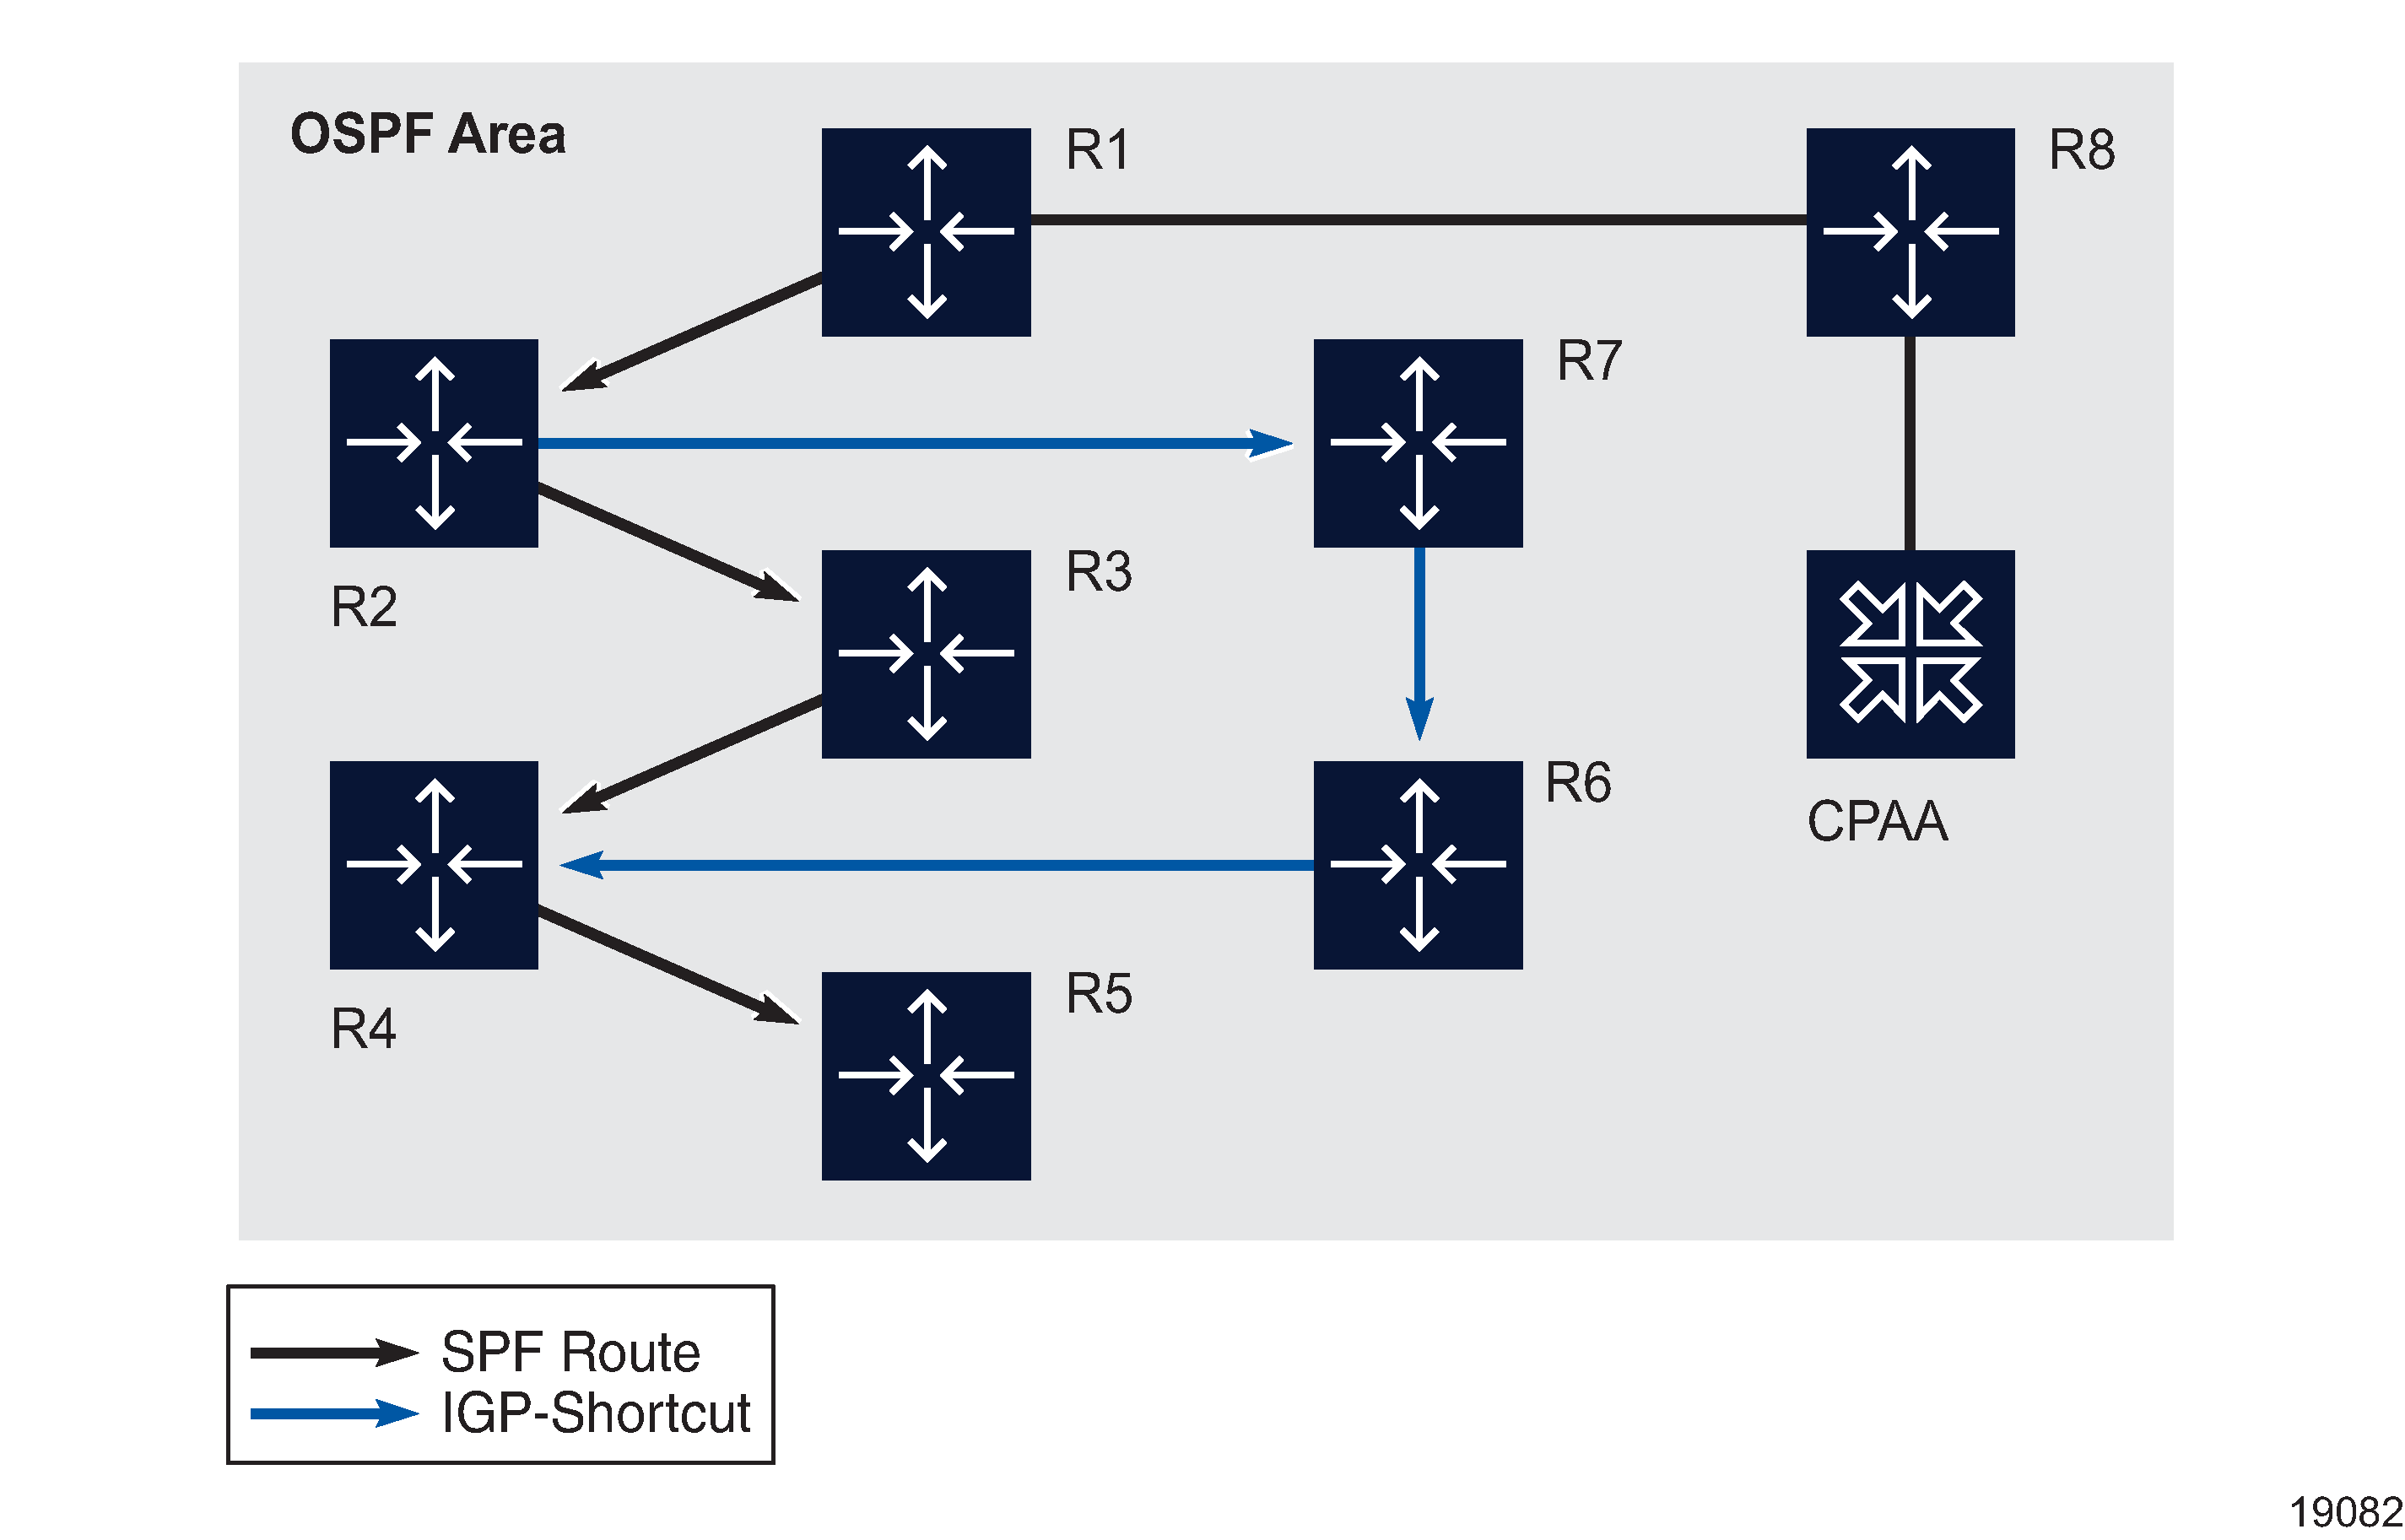 Sample OSPF network with IGP shortcut